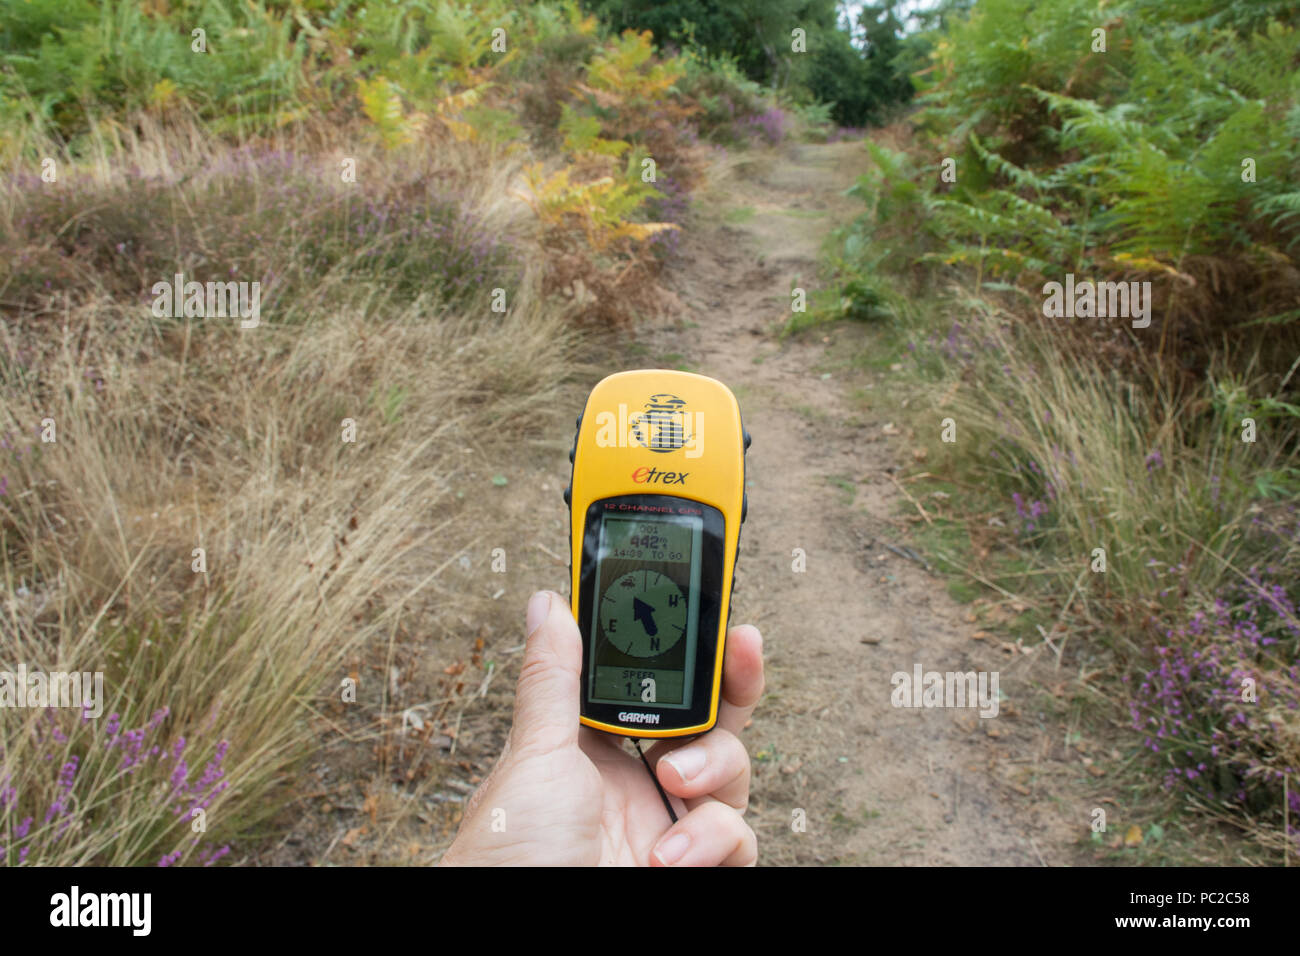 Woman using a handheld Garmin GPS unit to find the way along countryside (heathland) footpaths Stock Photo